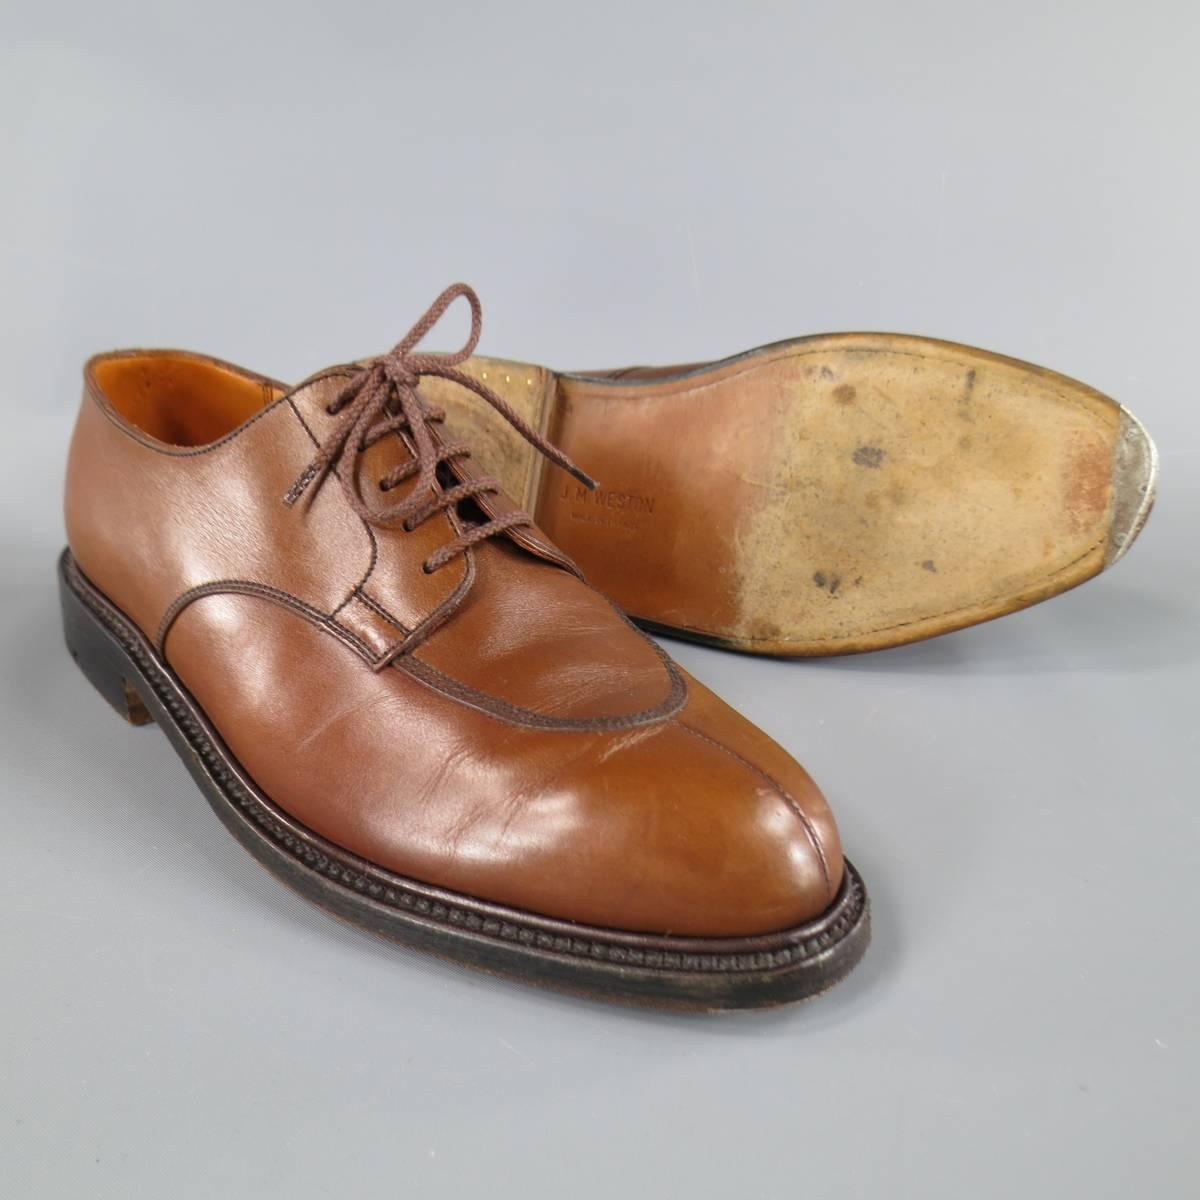 J.M. WESTON Lace-Up Shoes consists of leather material in a tan color tone. Designed in a derby style, front toe seam with top fine stitching along sides. Detailed with a metal toe base, dark brown leather sole. Comes with original box. Hand made in